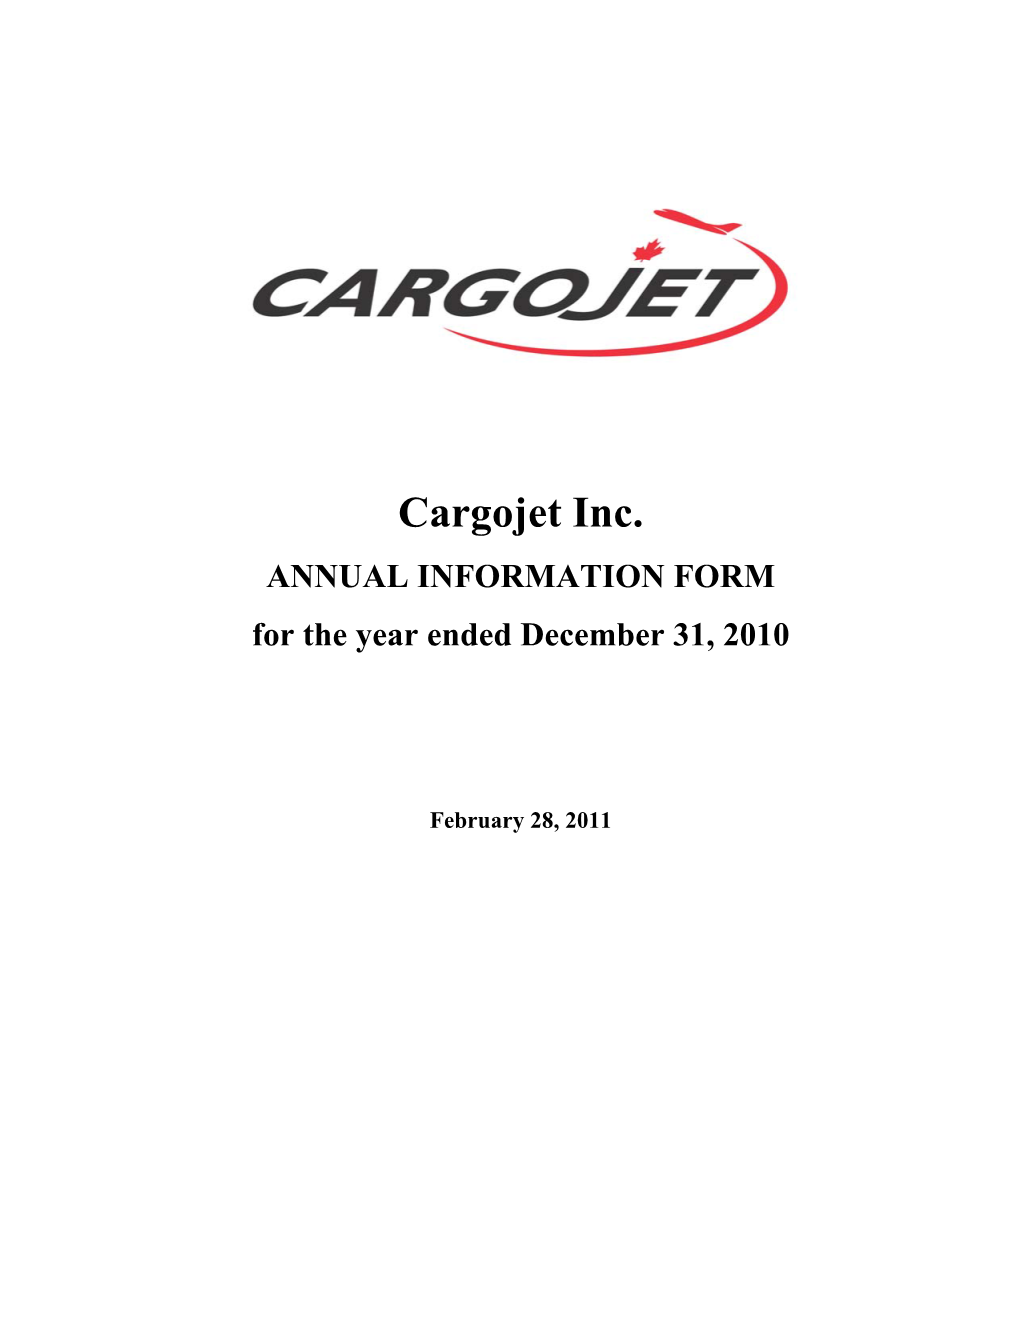 Cargojet Inc. ANNUAL INFORMATION FORM for the Year Ended December 31, 2010